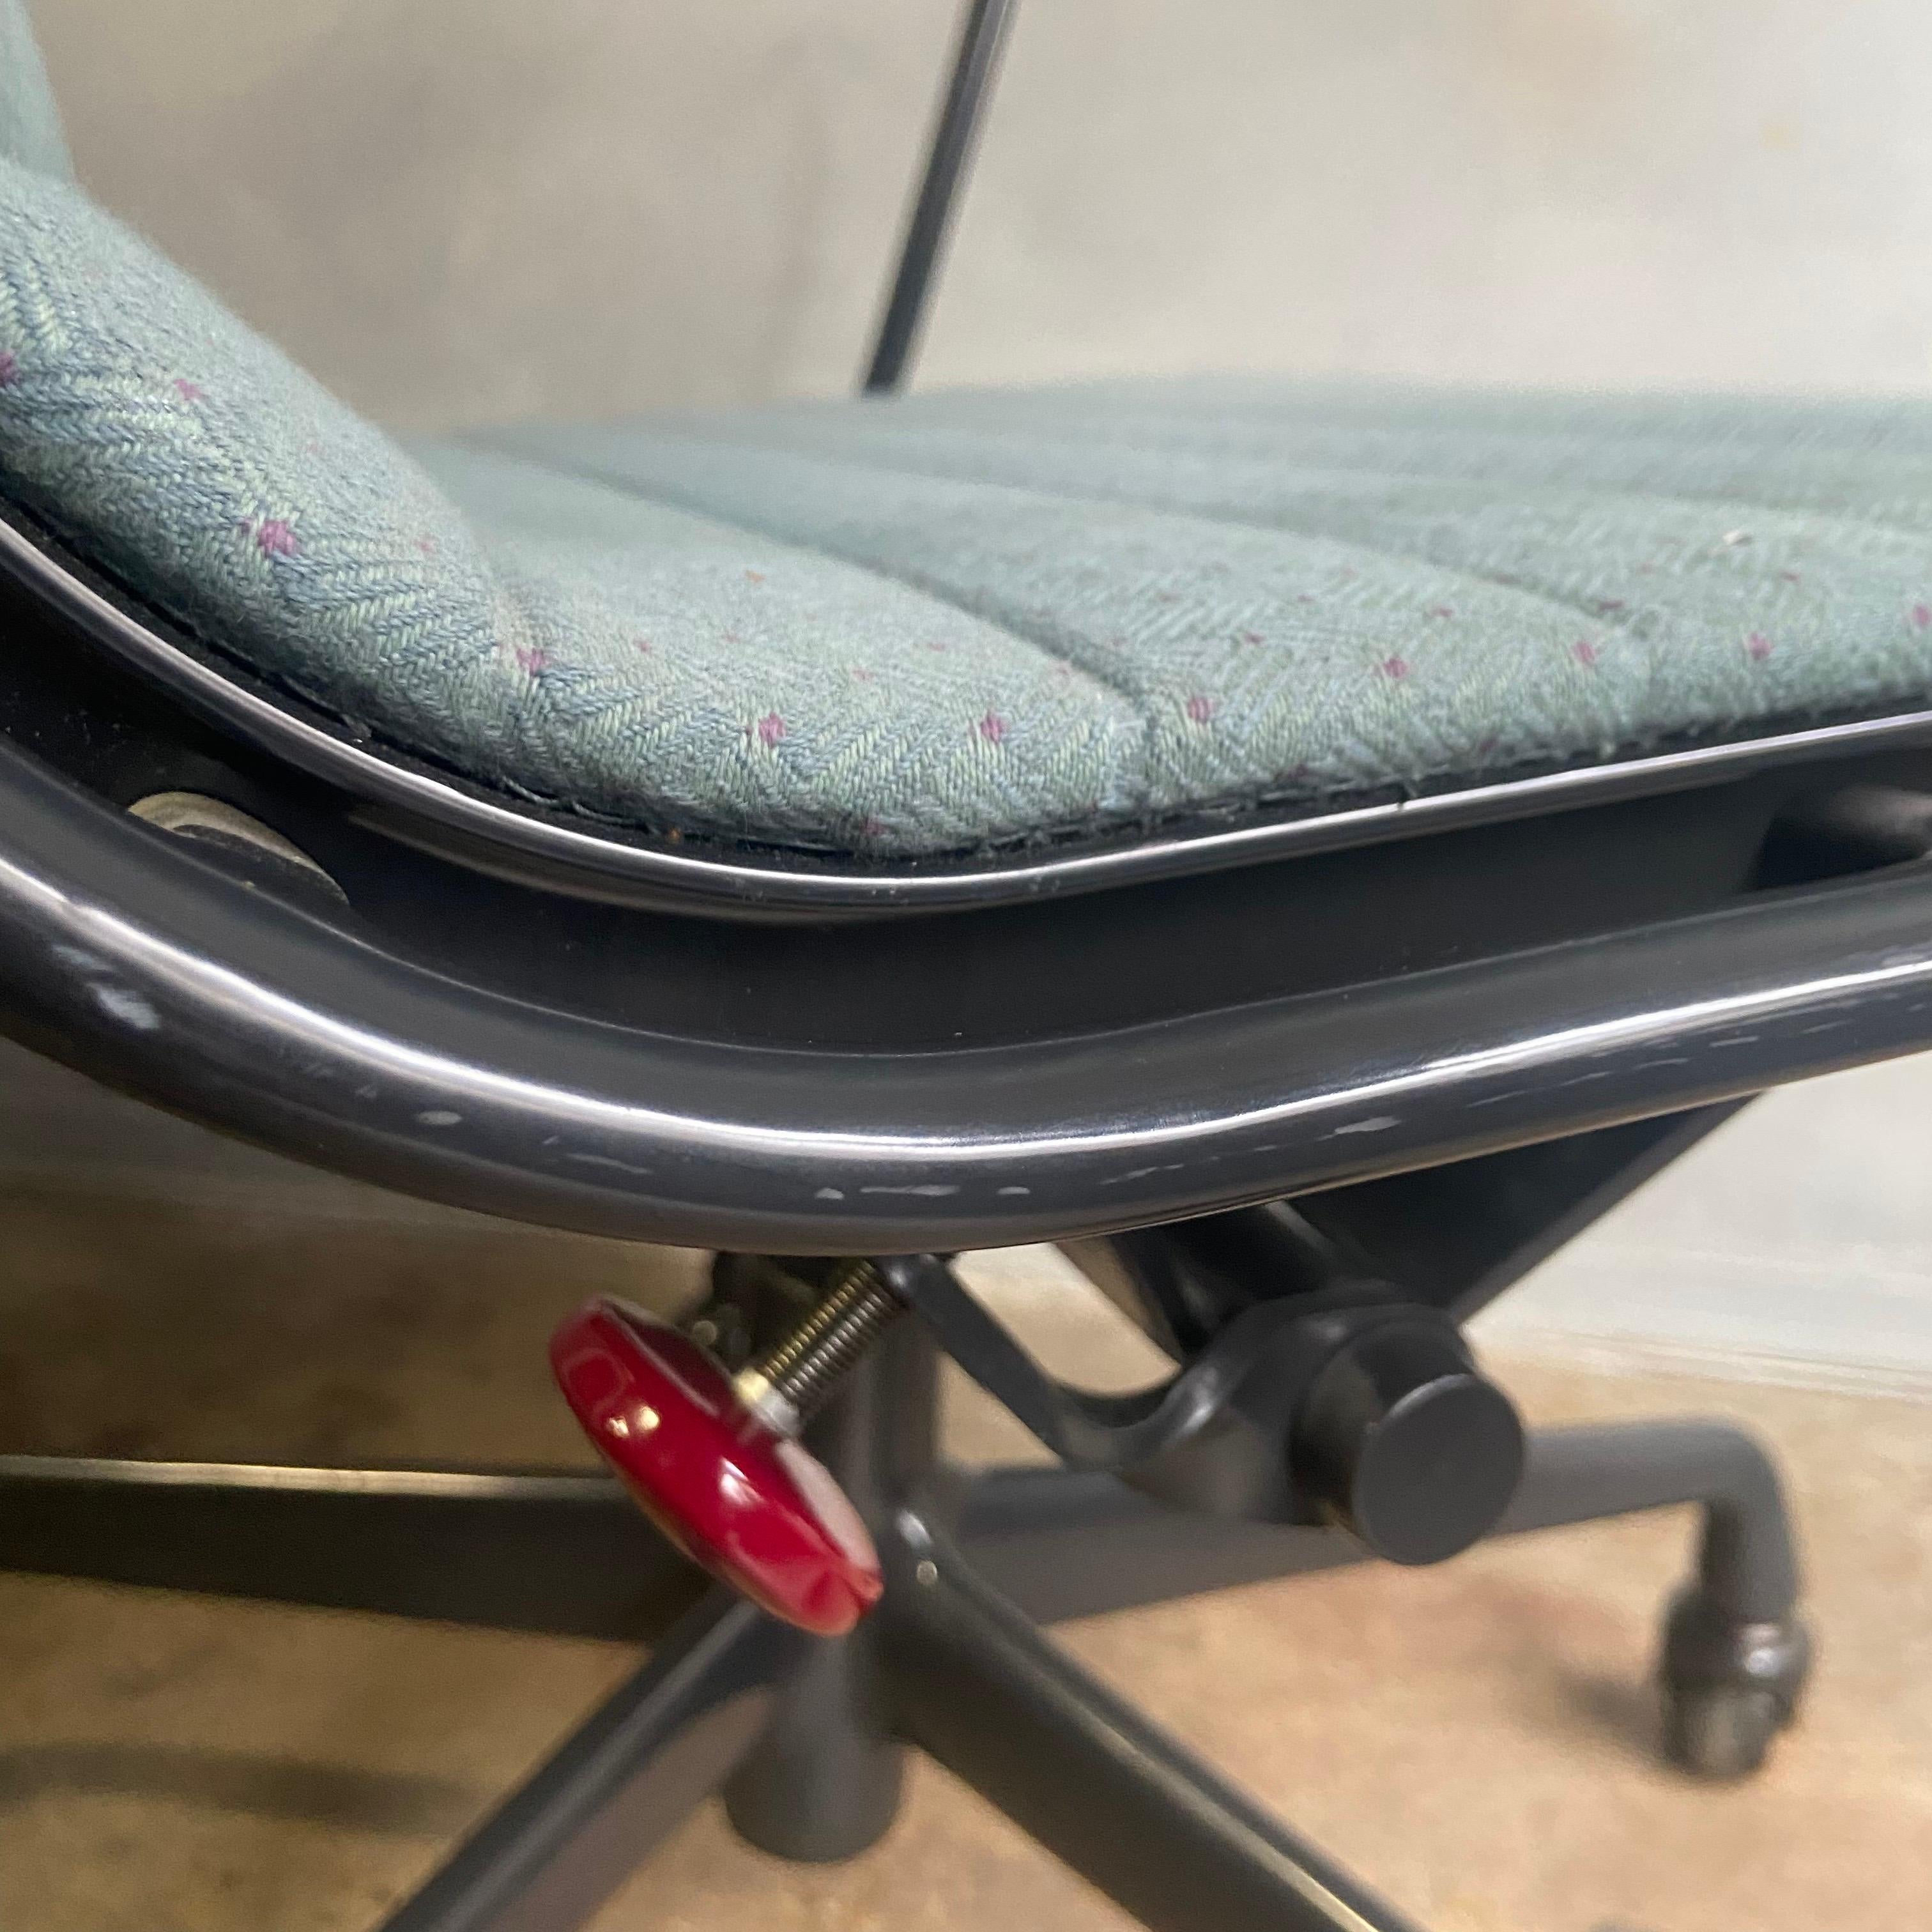 Are rare find of 1980's Aluminum group chairs from the 1980's. These chairs have a strong Memphis Milano look with period fabric and red adjustment knob that can only be found on Eames chairs for a short time. The frames are in an almost black /